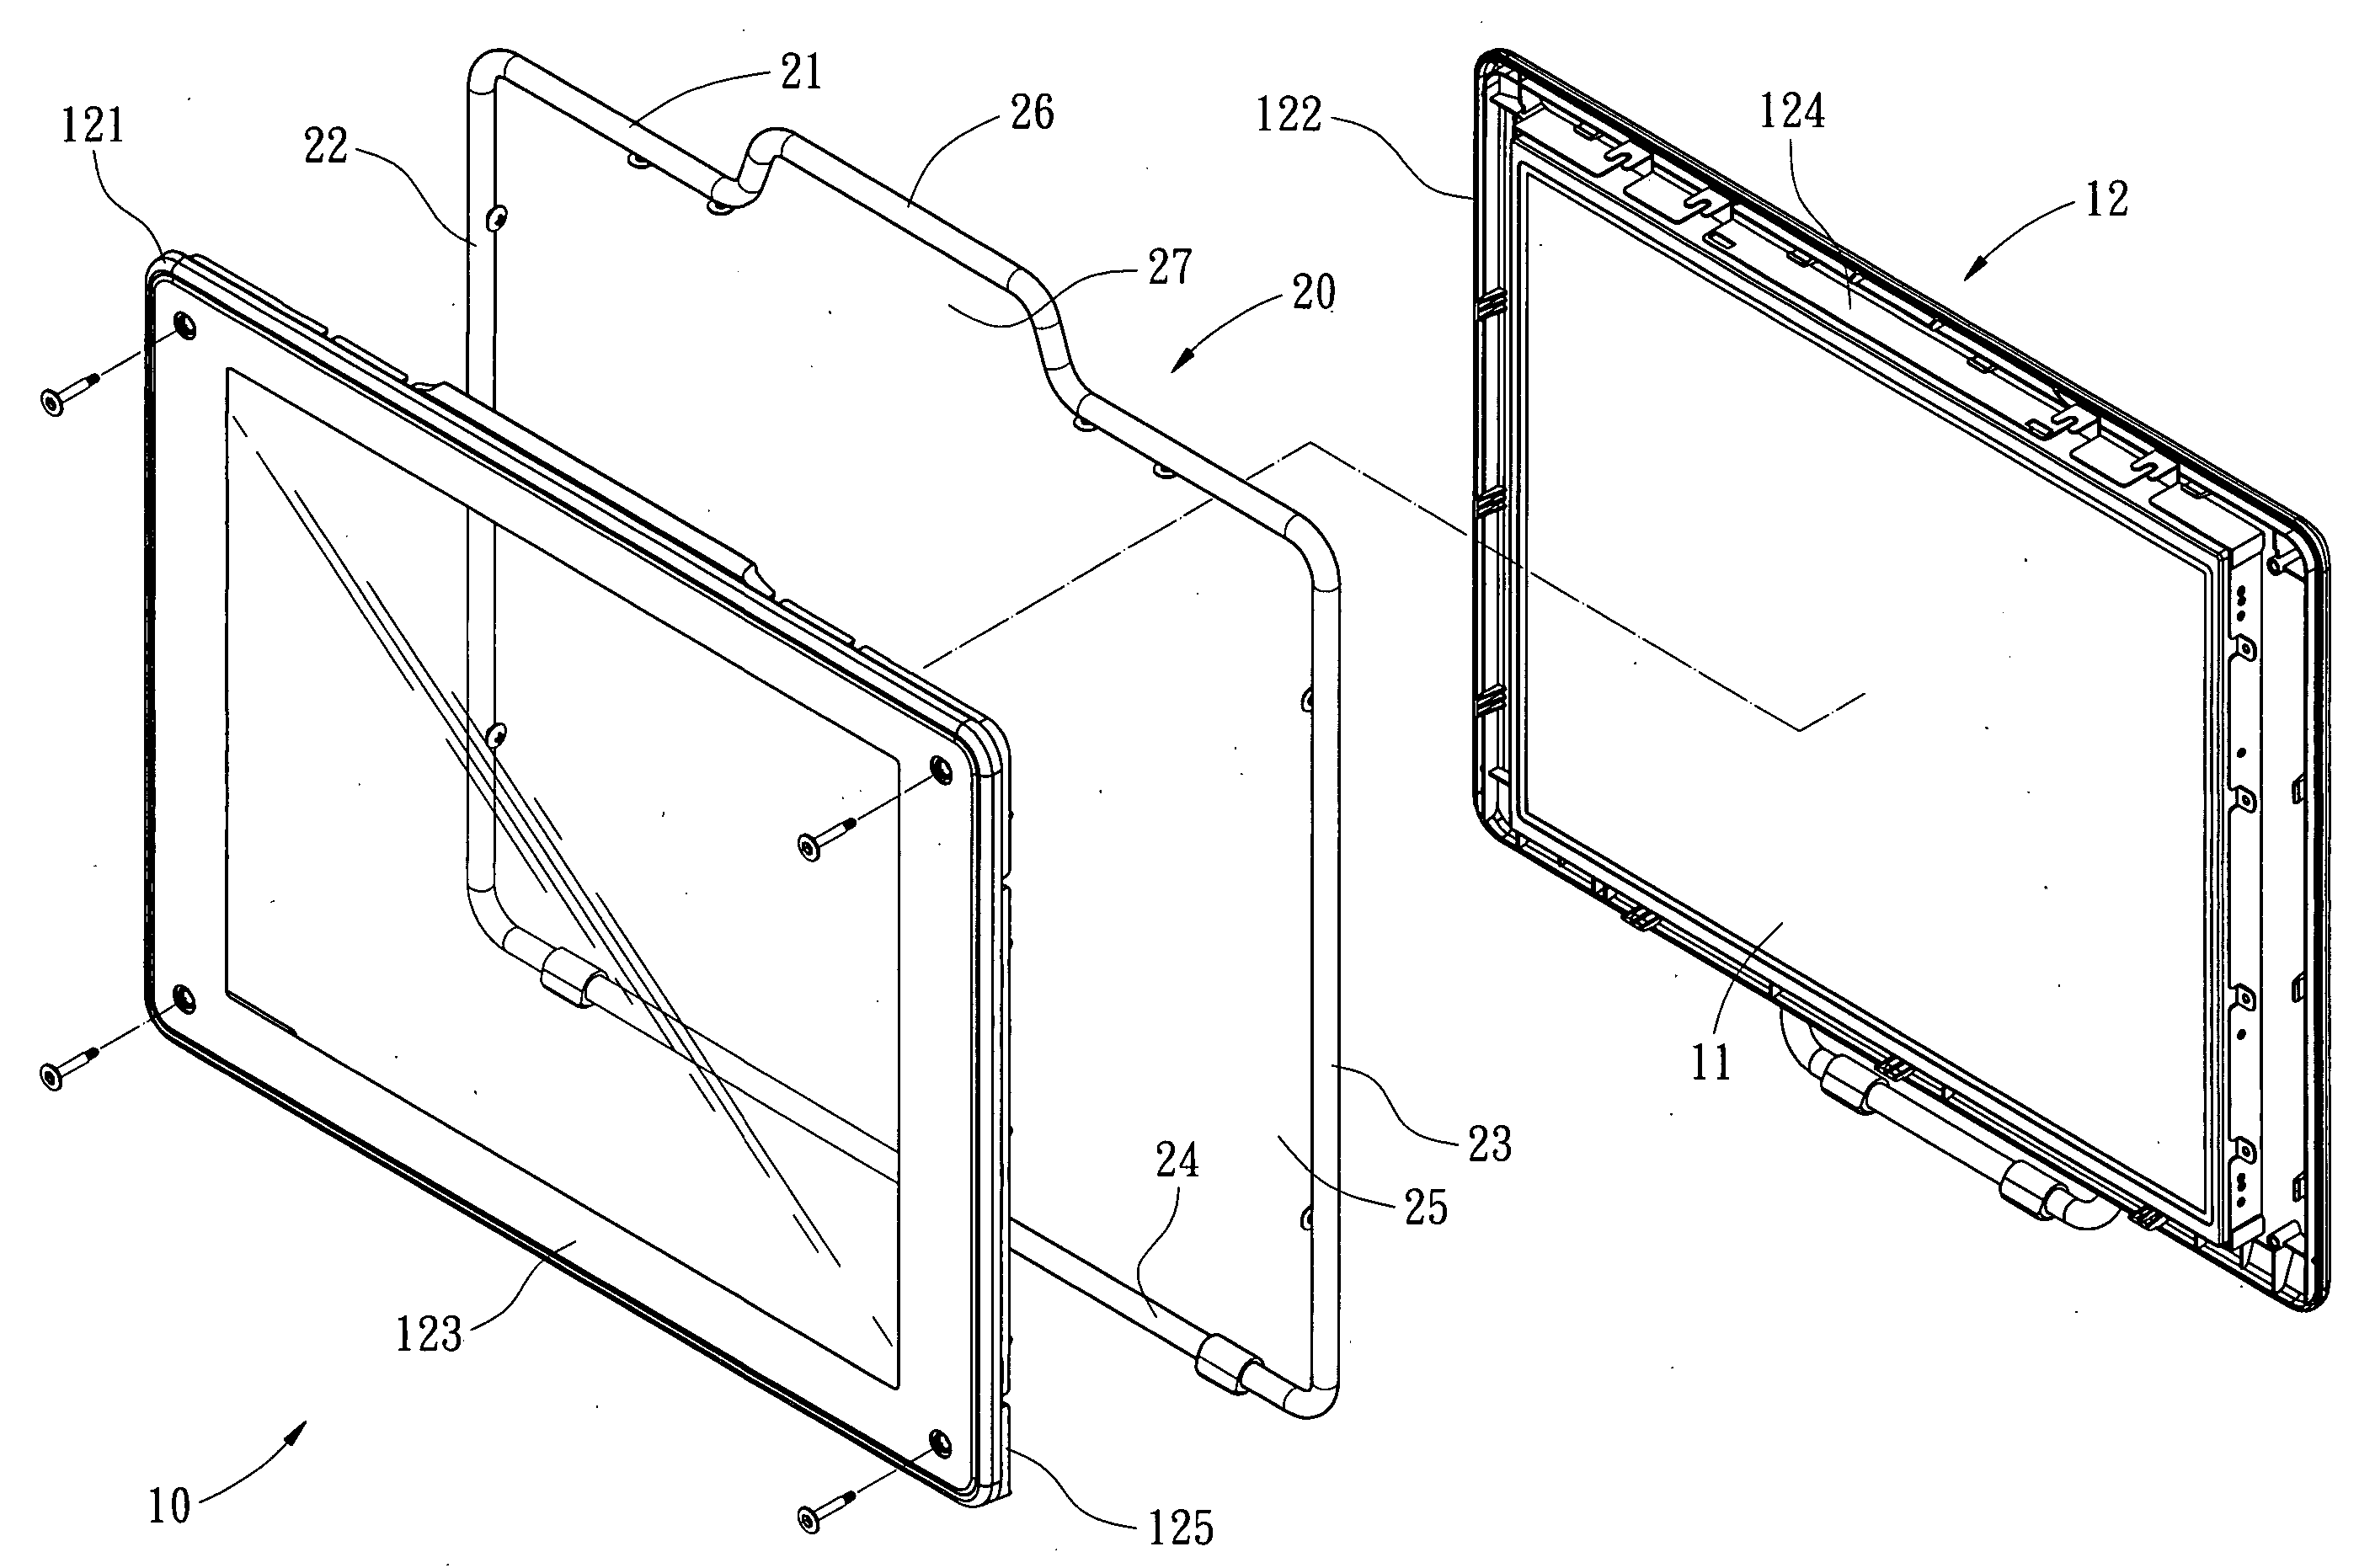 Monitor frame with integrated handle structure